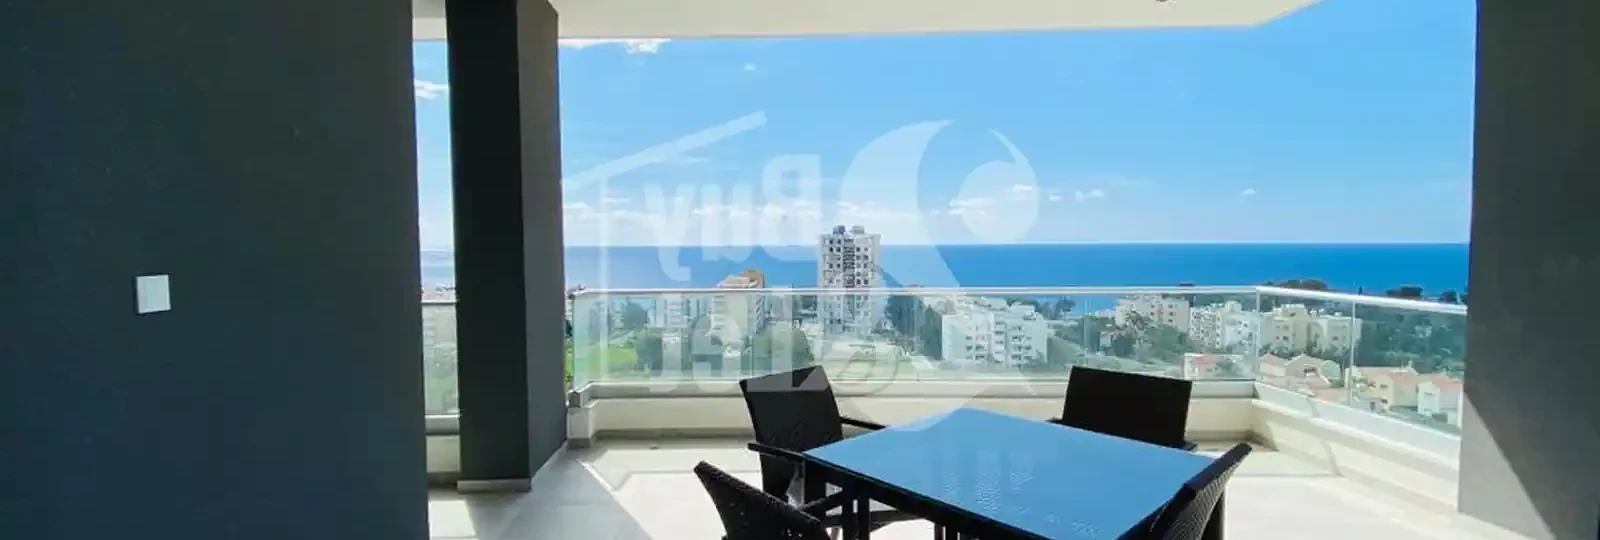 3-bedroom apartment fоr sаle €1.080.000, image 1